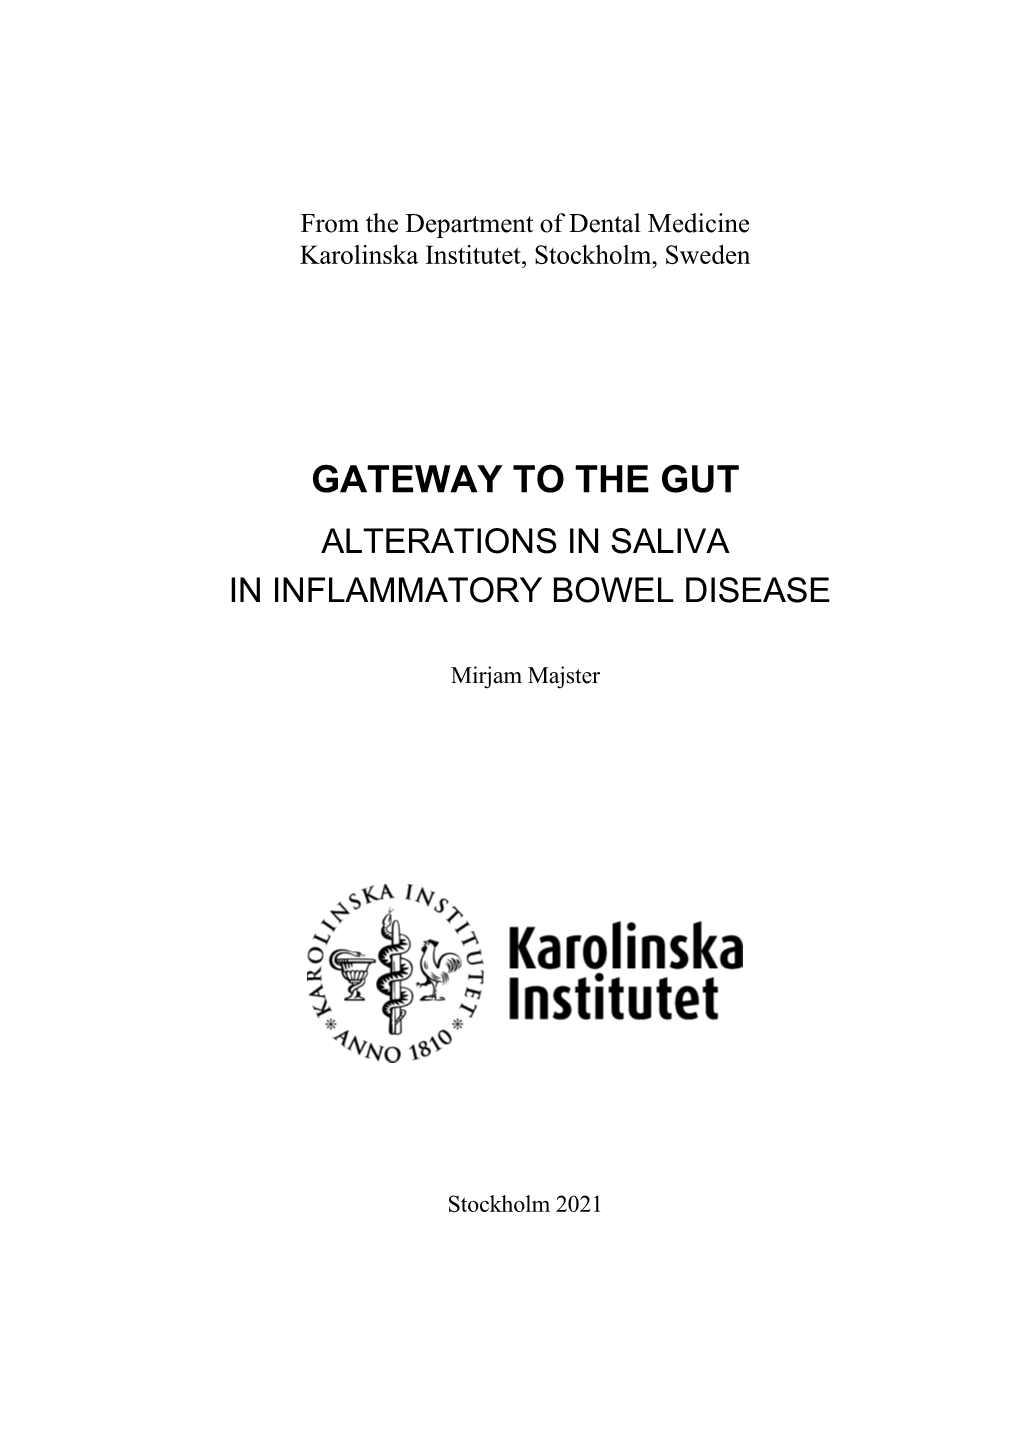 Gateway to the Gut Alterations in Saliva in Inflammatory Bowel Disease